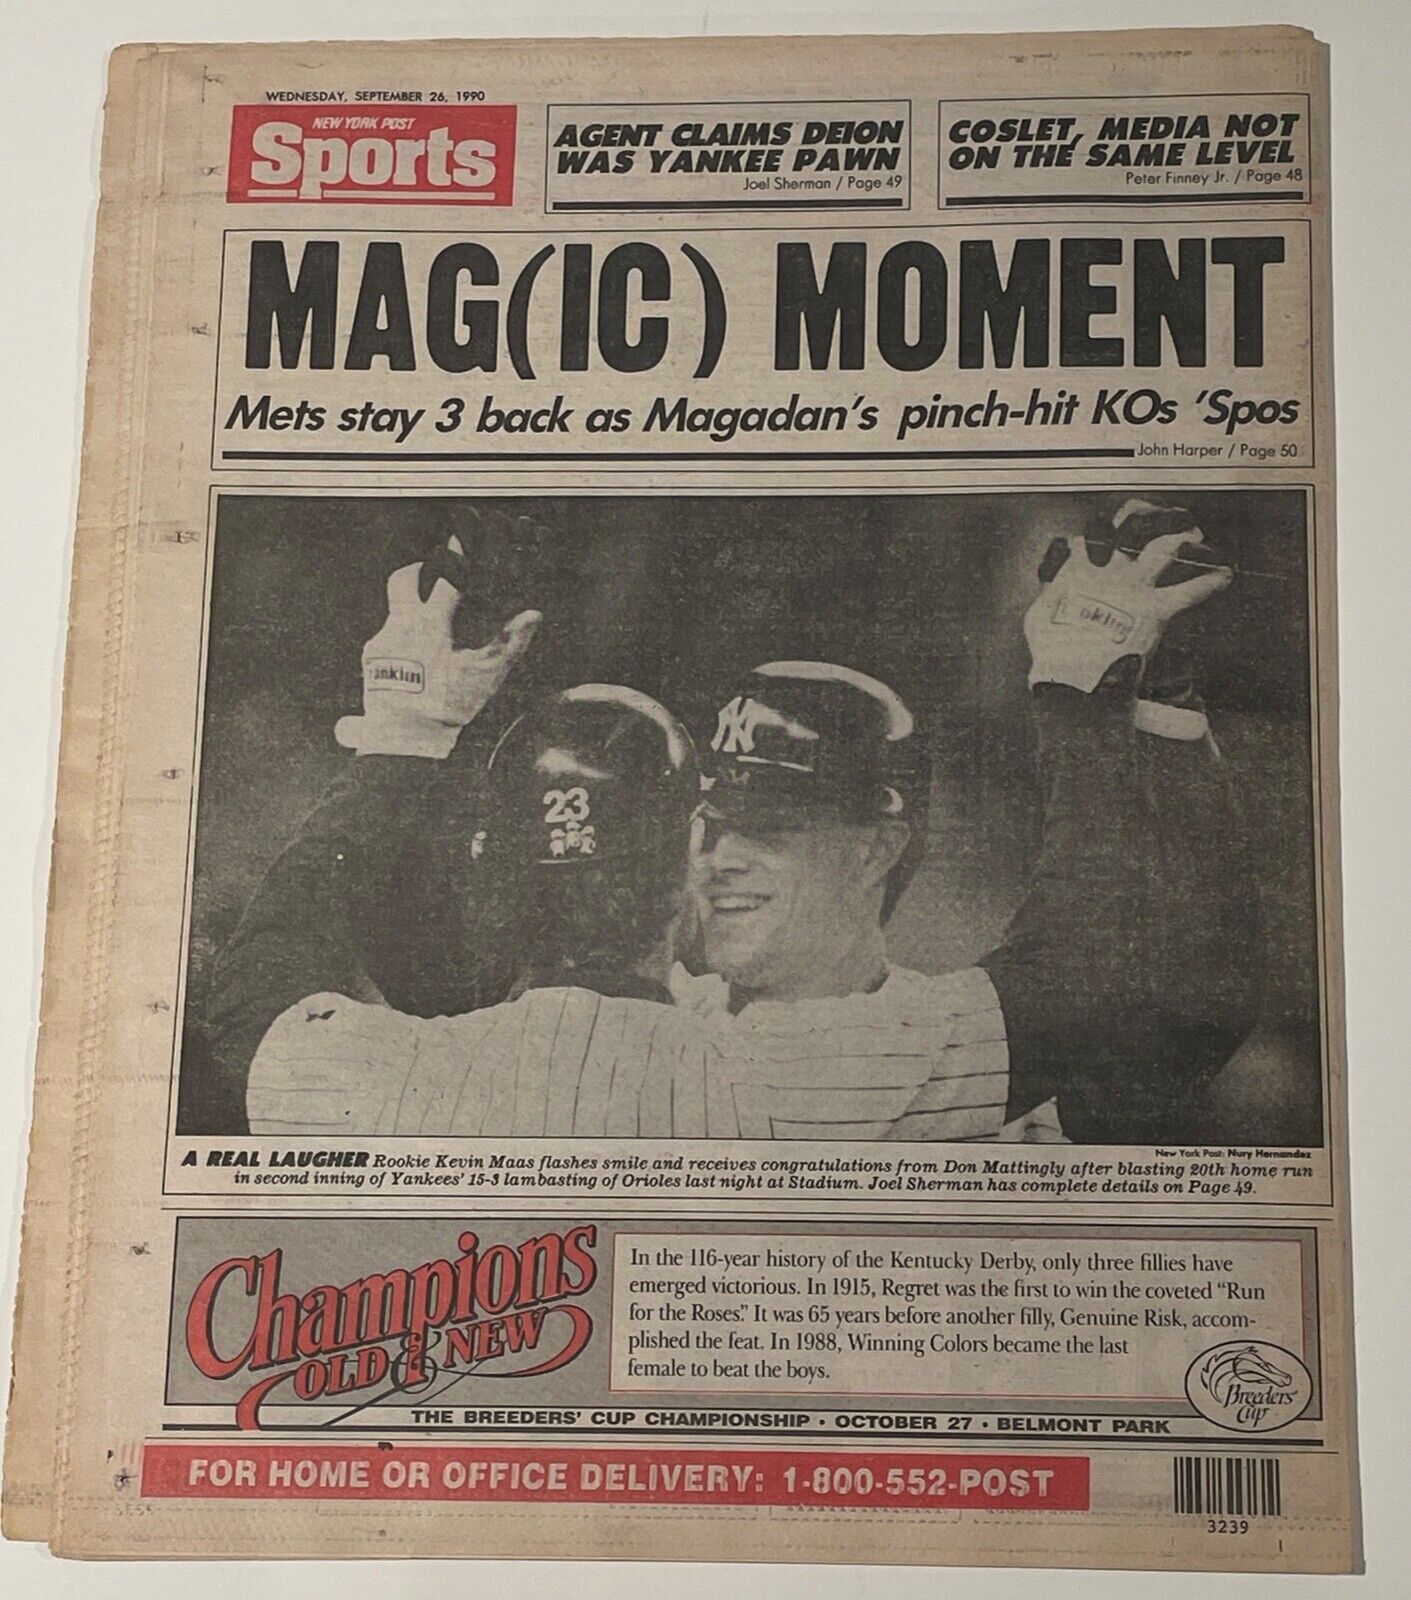 Phil Rizzuto Signed NY Post &quot;Holy Cow&quot; Newspaper. NY Yankees. JSA